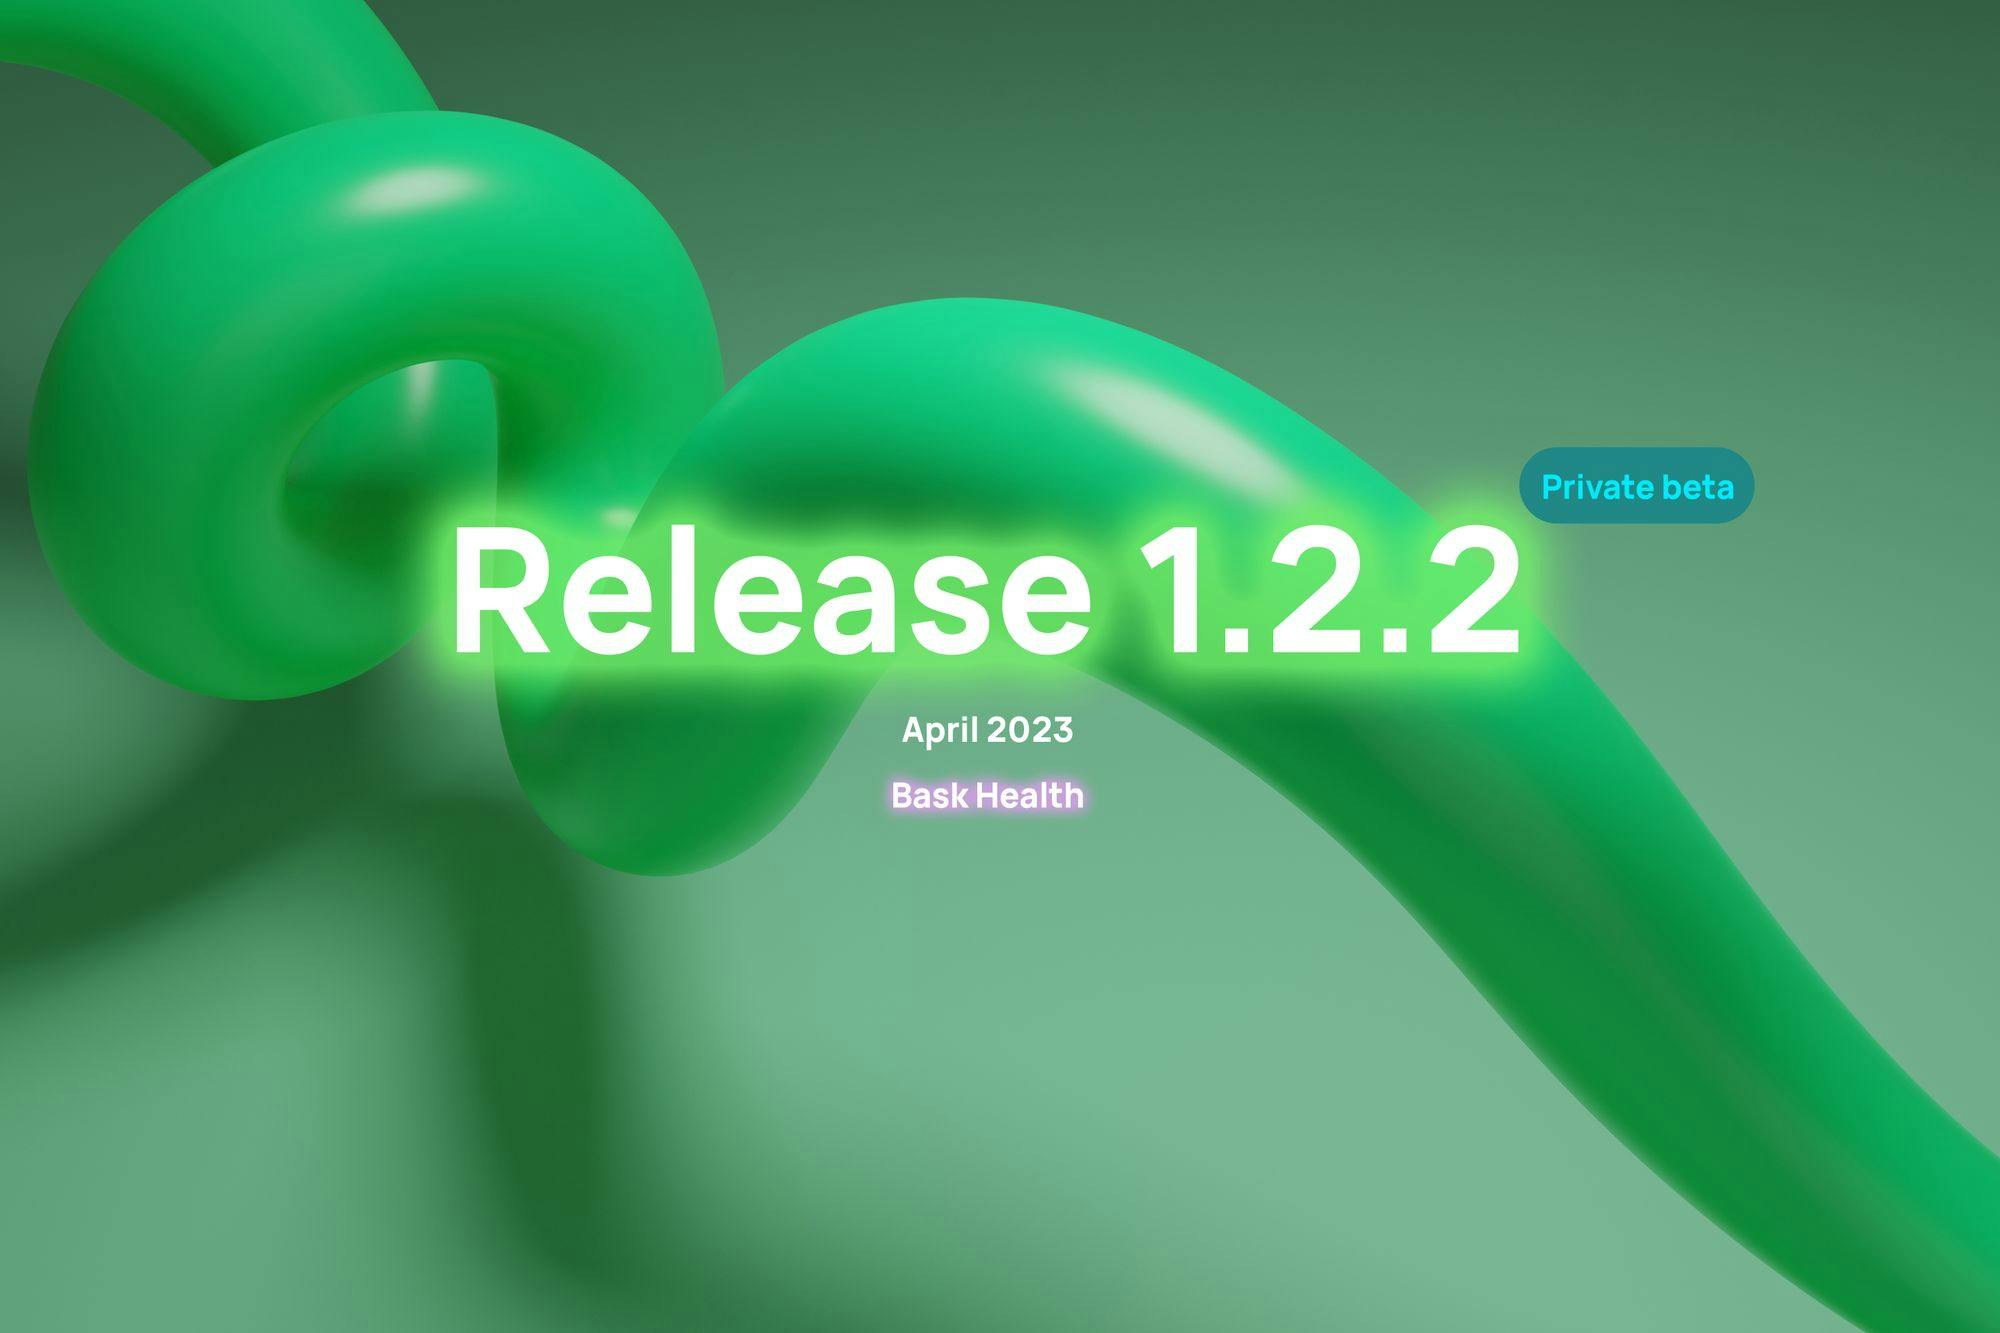 Release 1.2.2